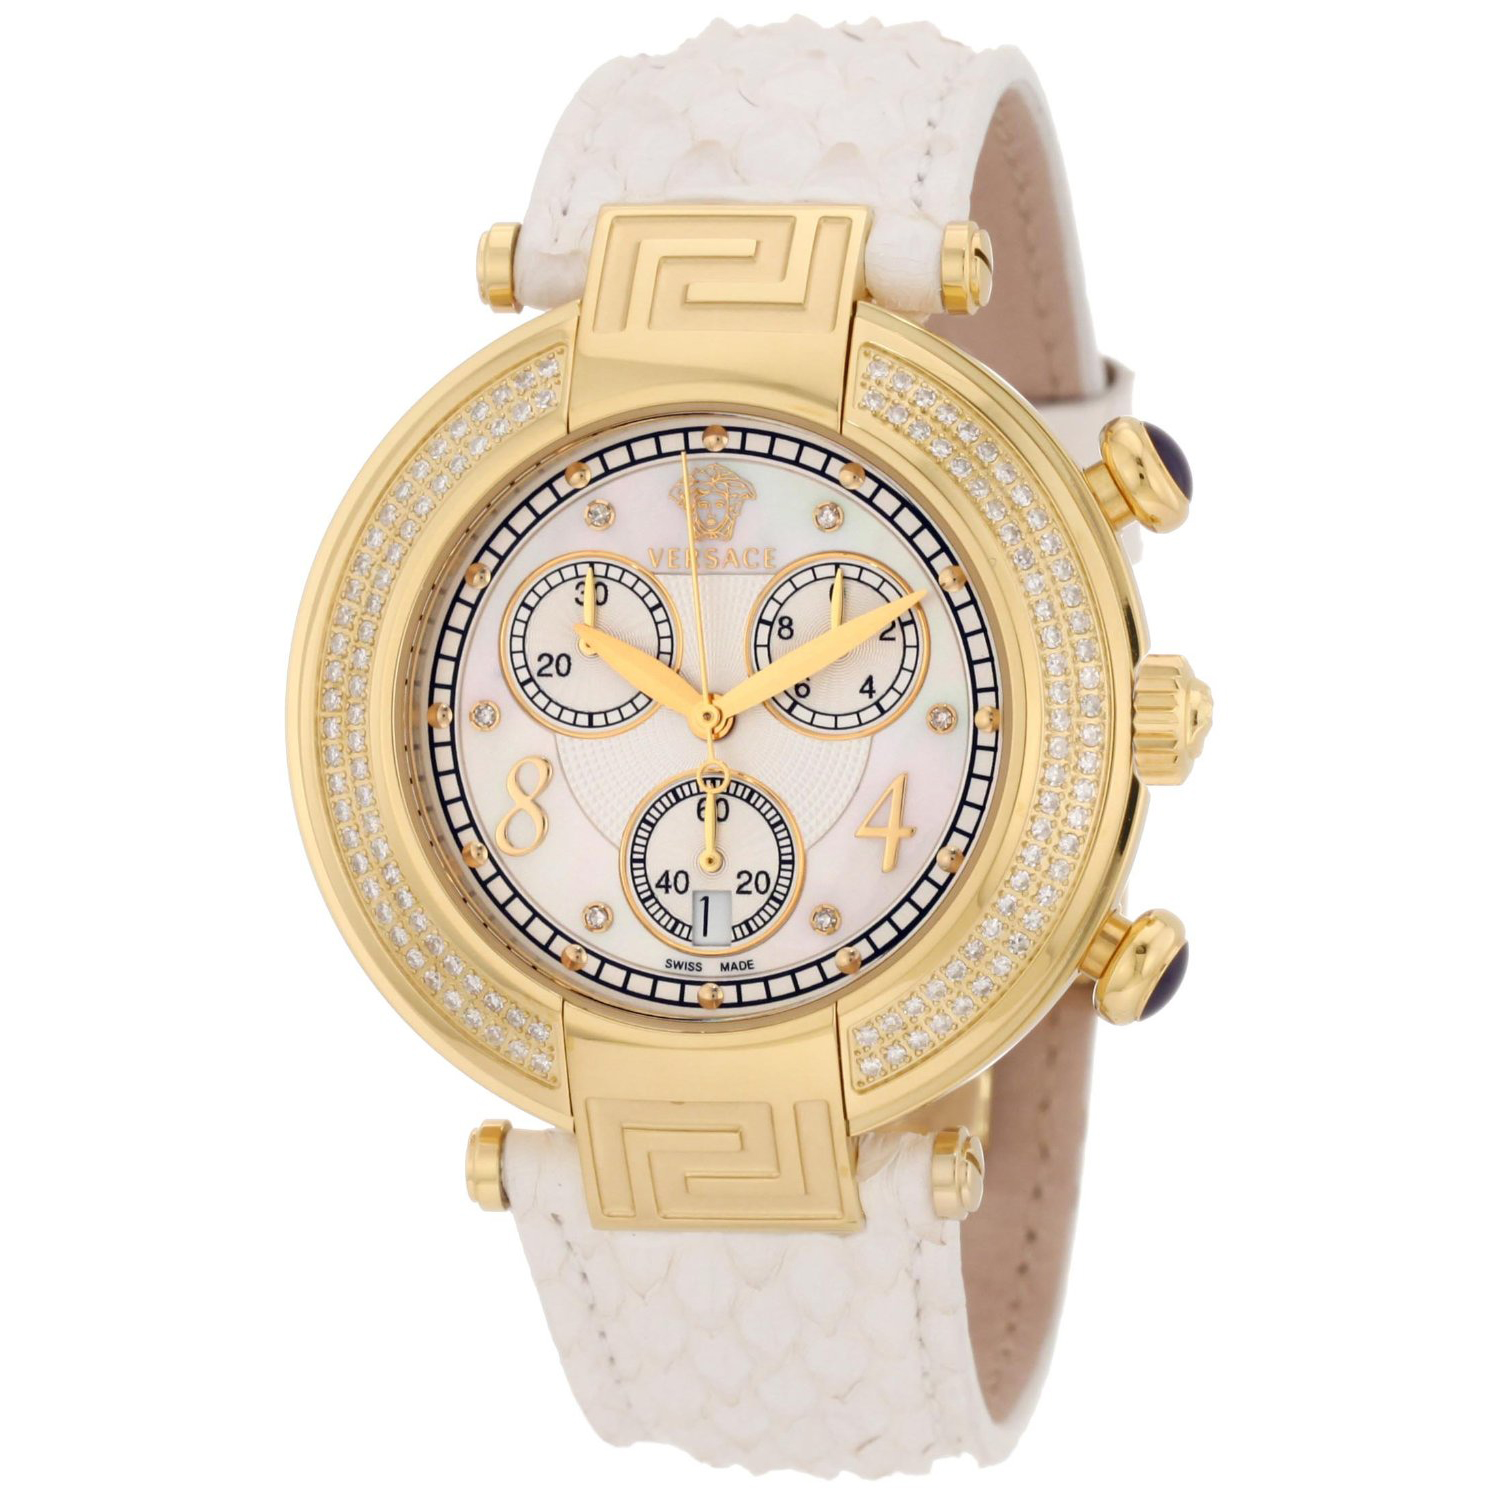 4th of July Sale: Up To 70% OFF Select Versace Watches